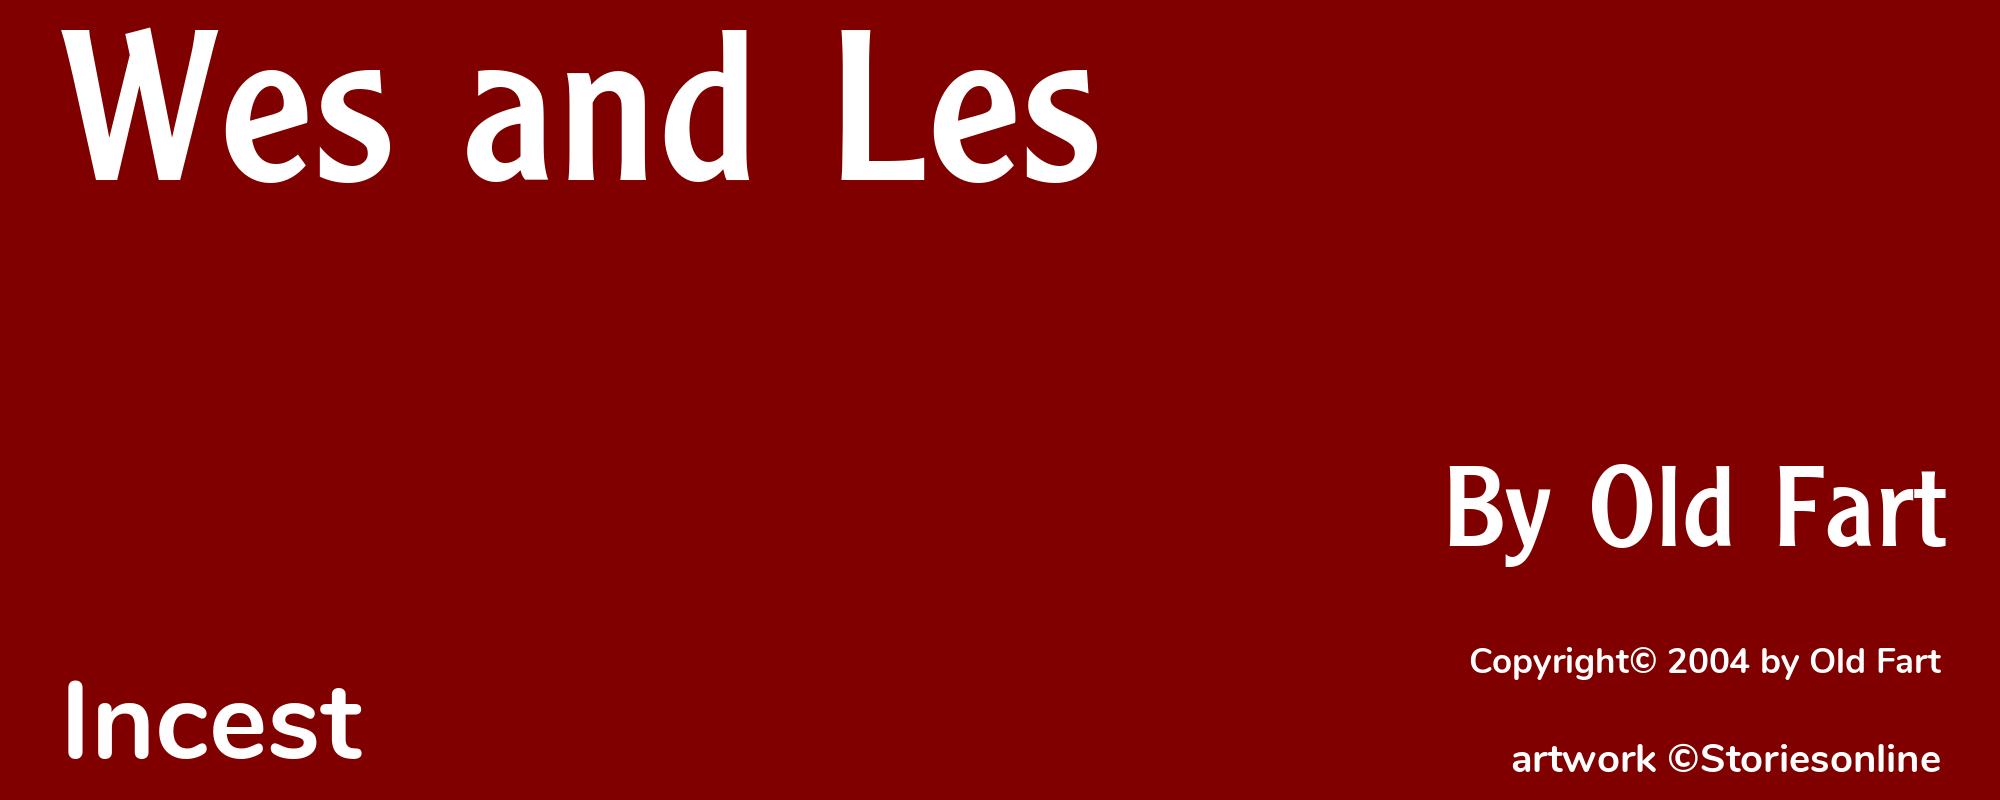 Wes and Les - Cover